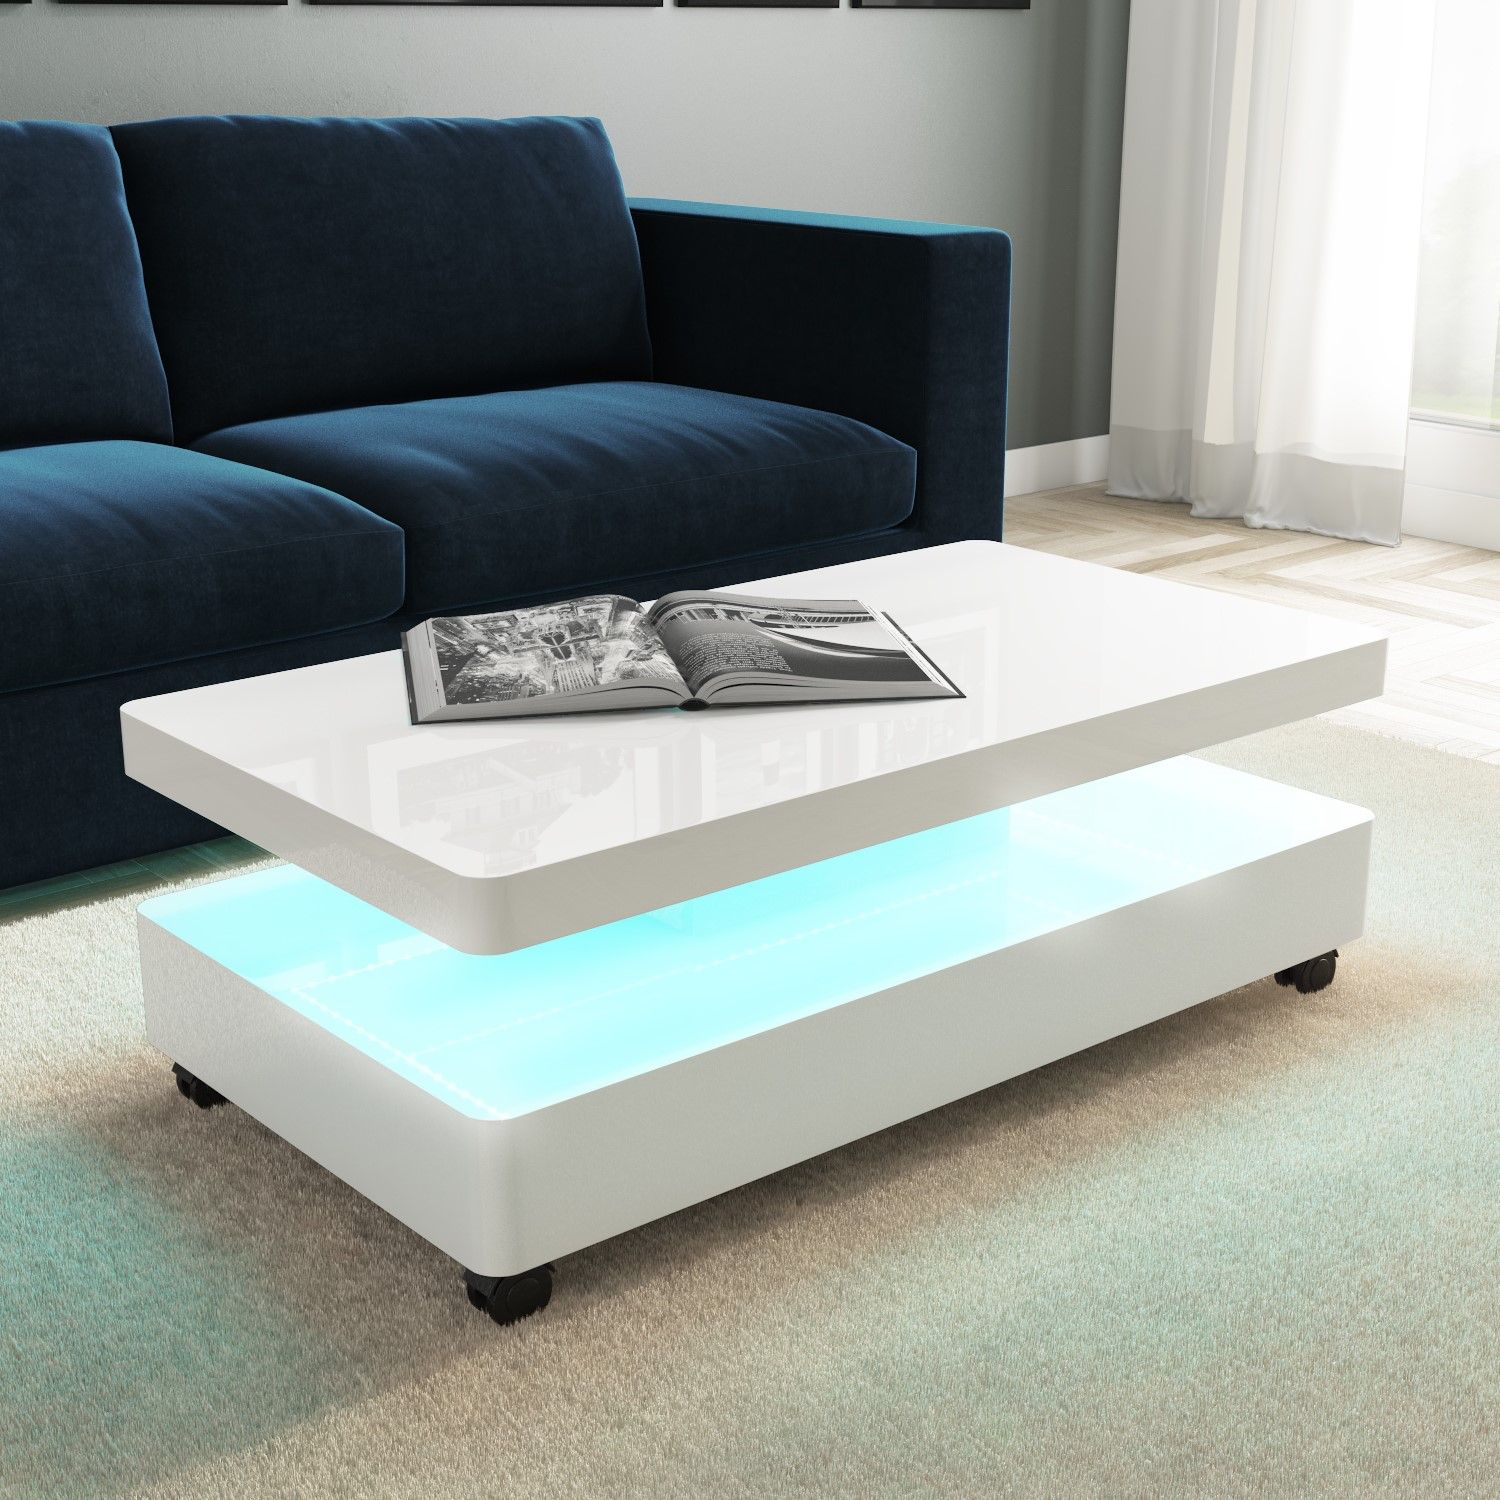 High Gloss White Coffee Table With Led Lighting 5060388562168 | Ebay Inside Coffee Tables With Drawers And Led Lights (View 8 of 20)